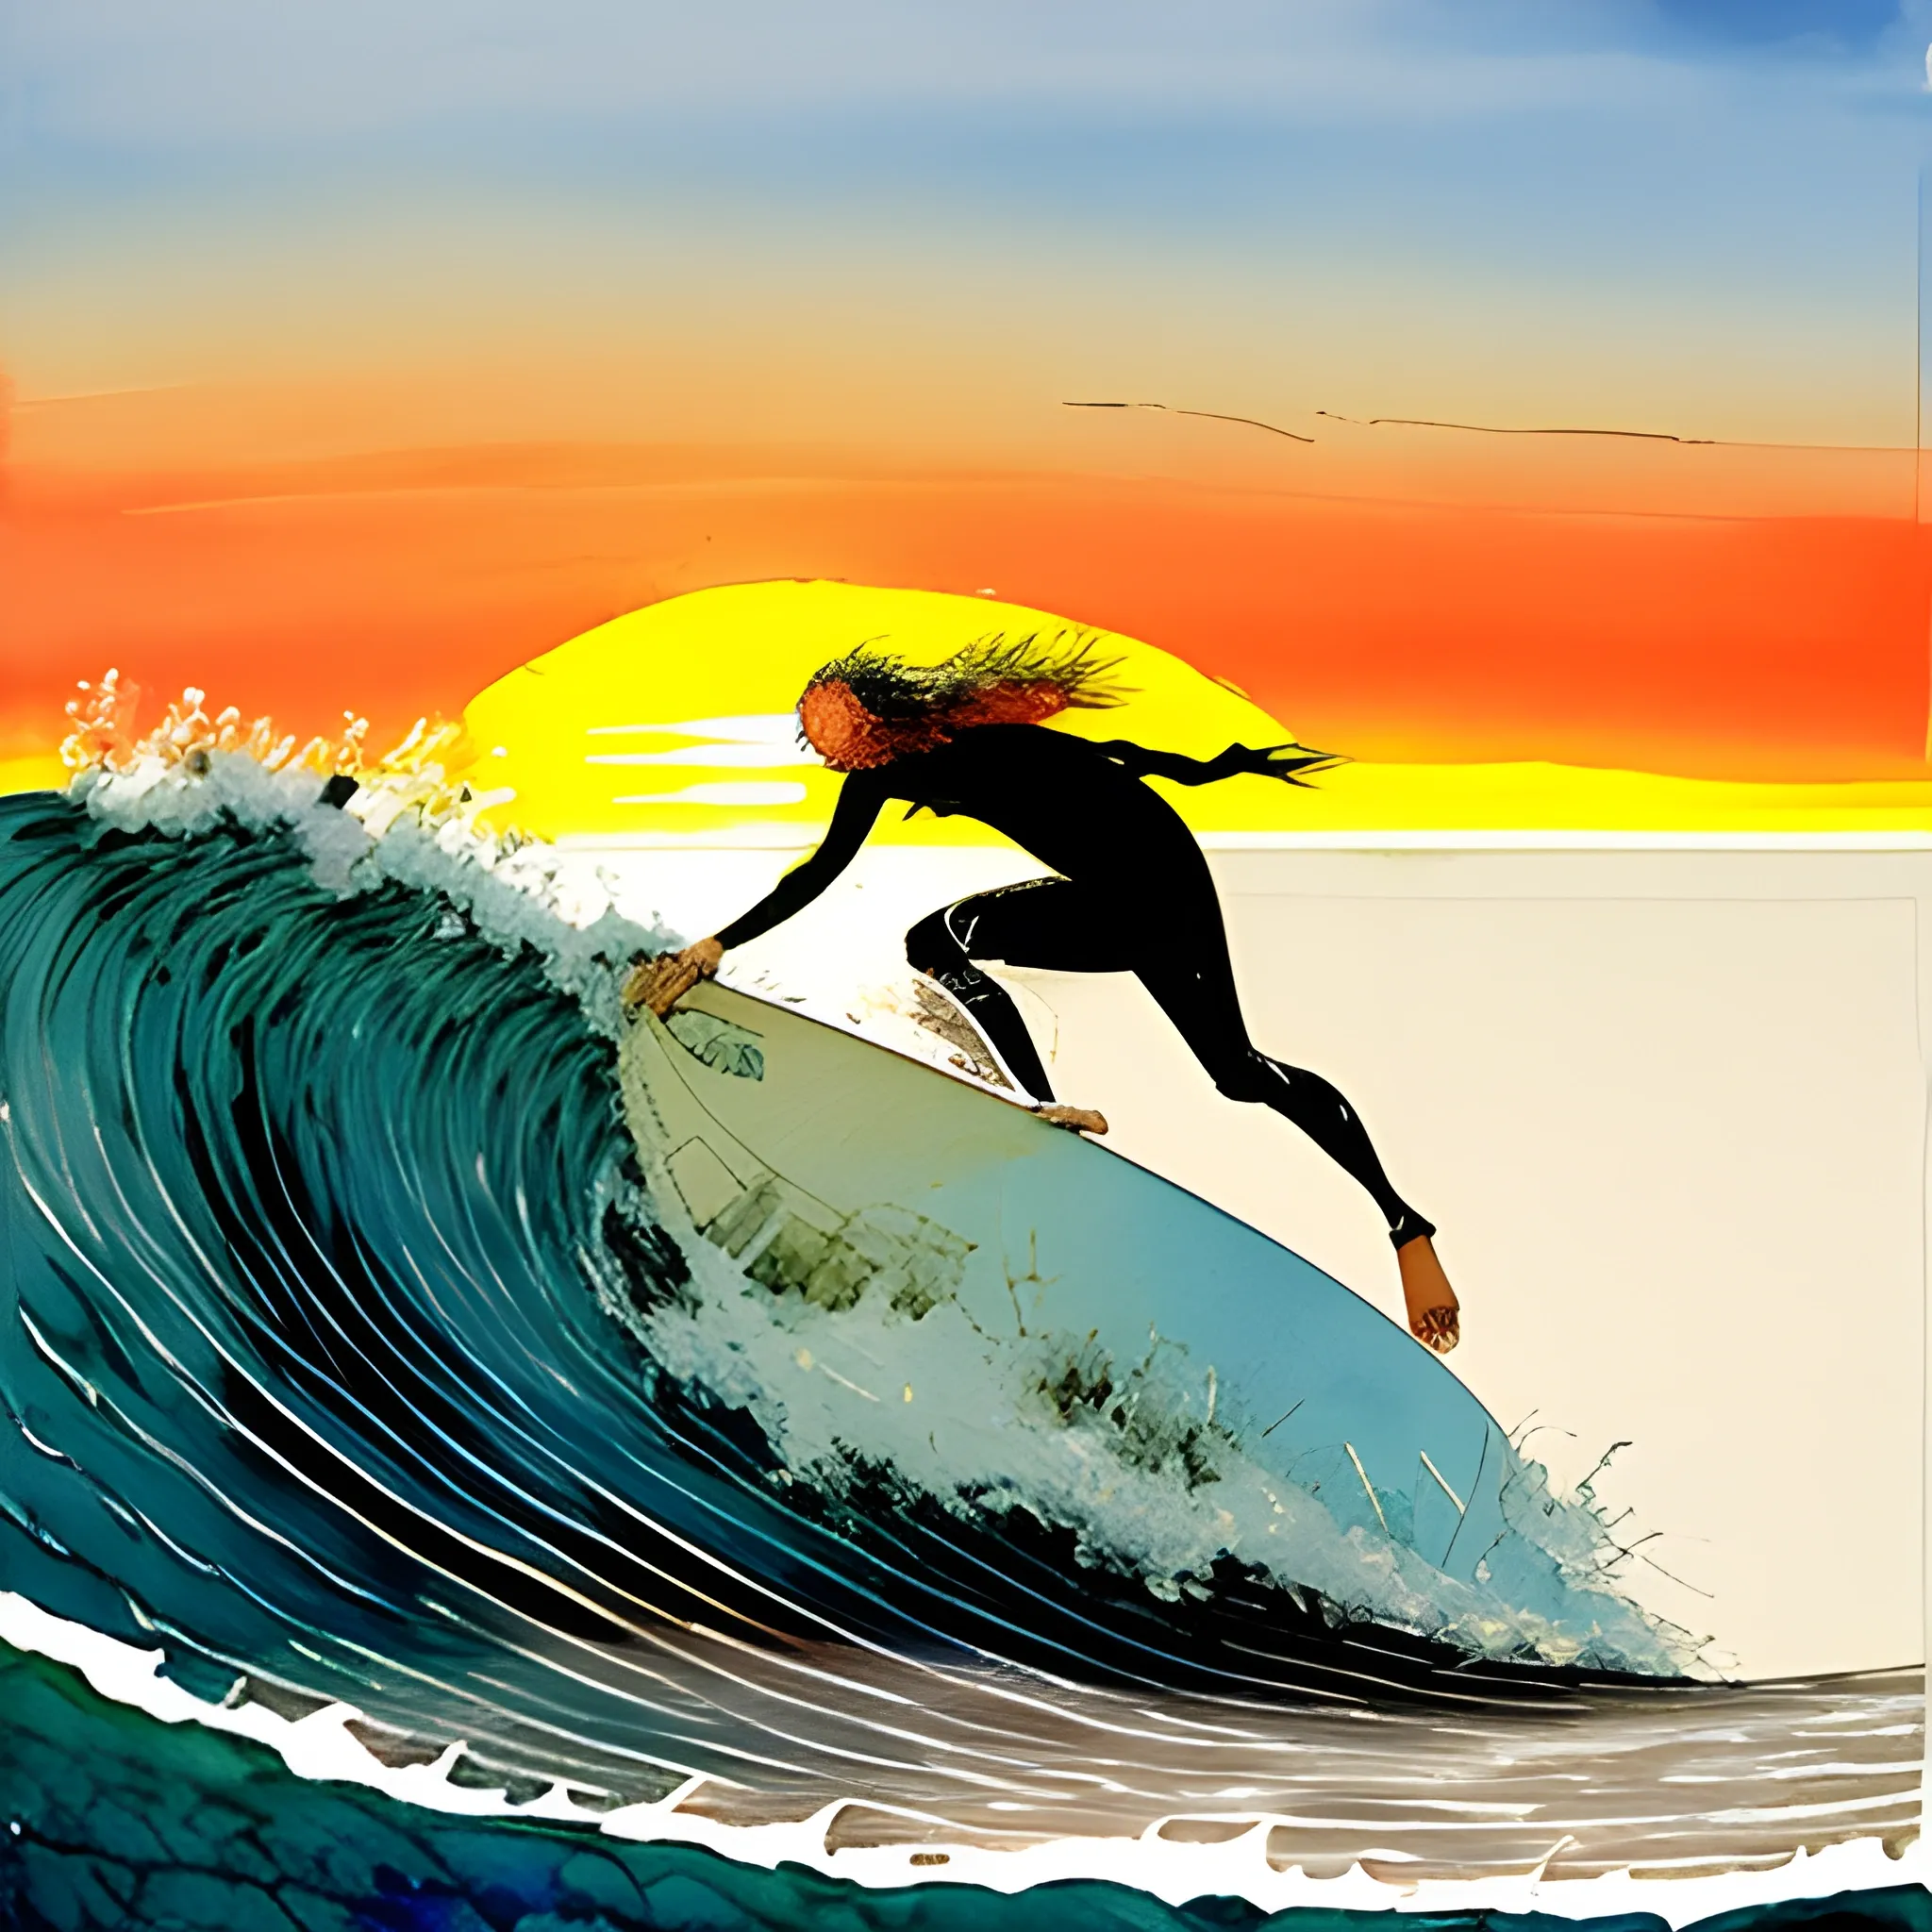 Ralph Steadman painting of a surfer on a huge wave with sunset behind, Water Color